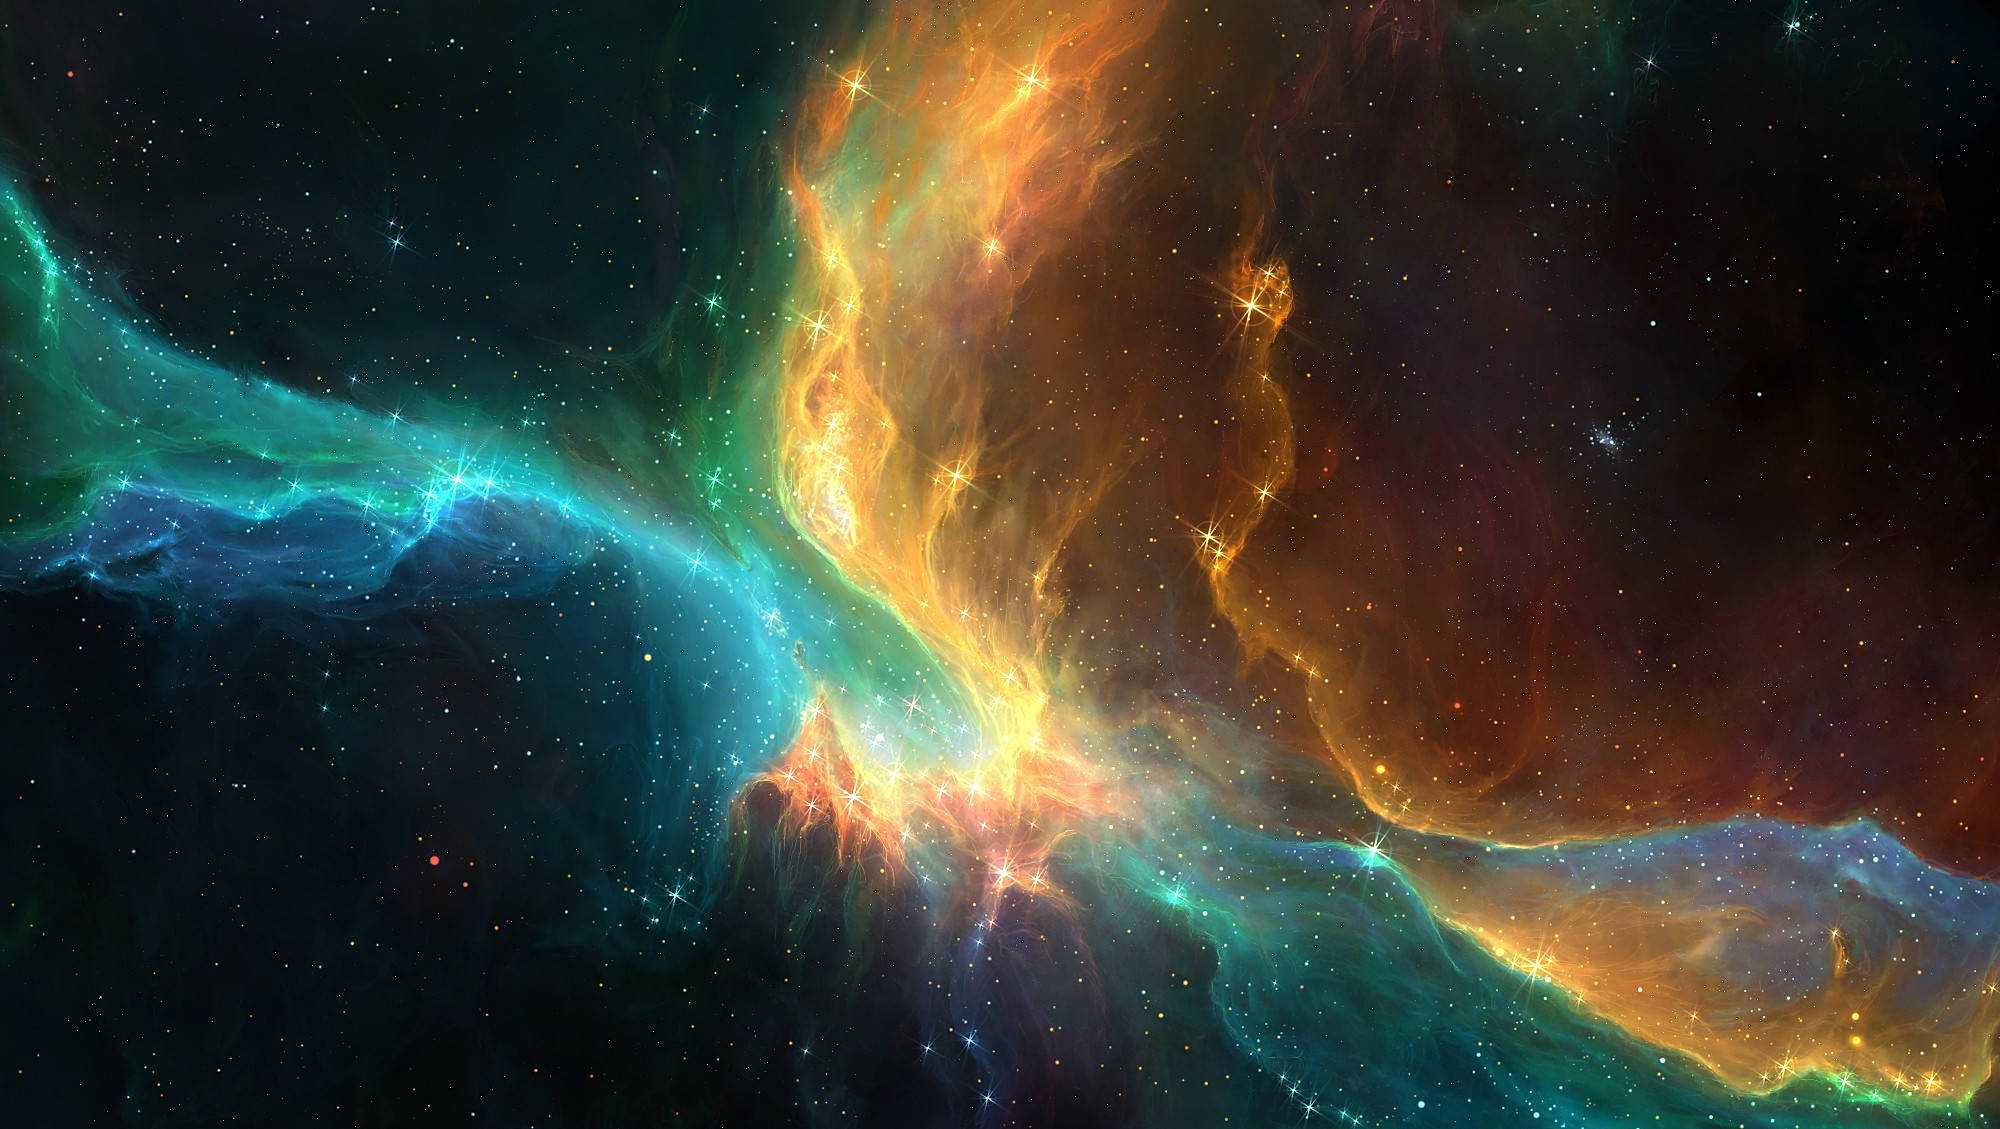 Streaks Of Hues In A Colorful Galaxy Wallpaper